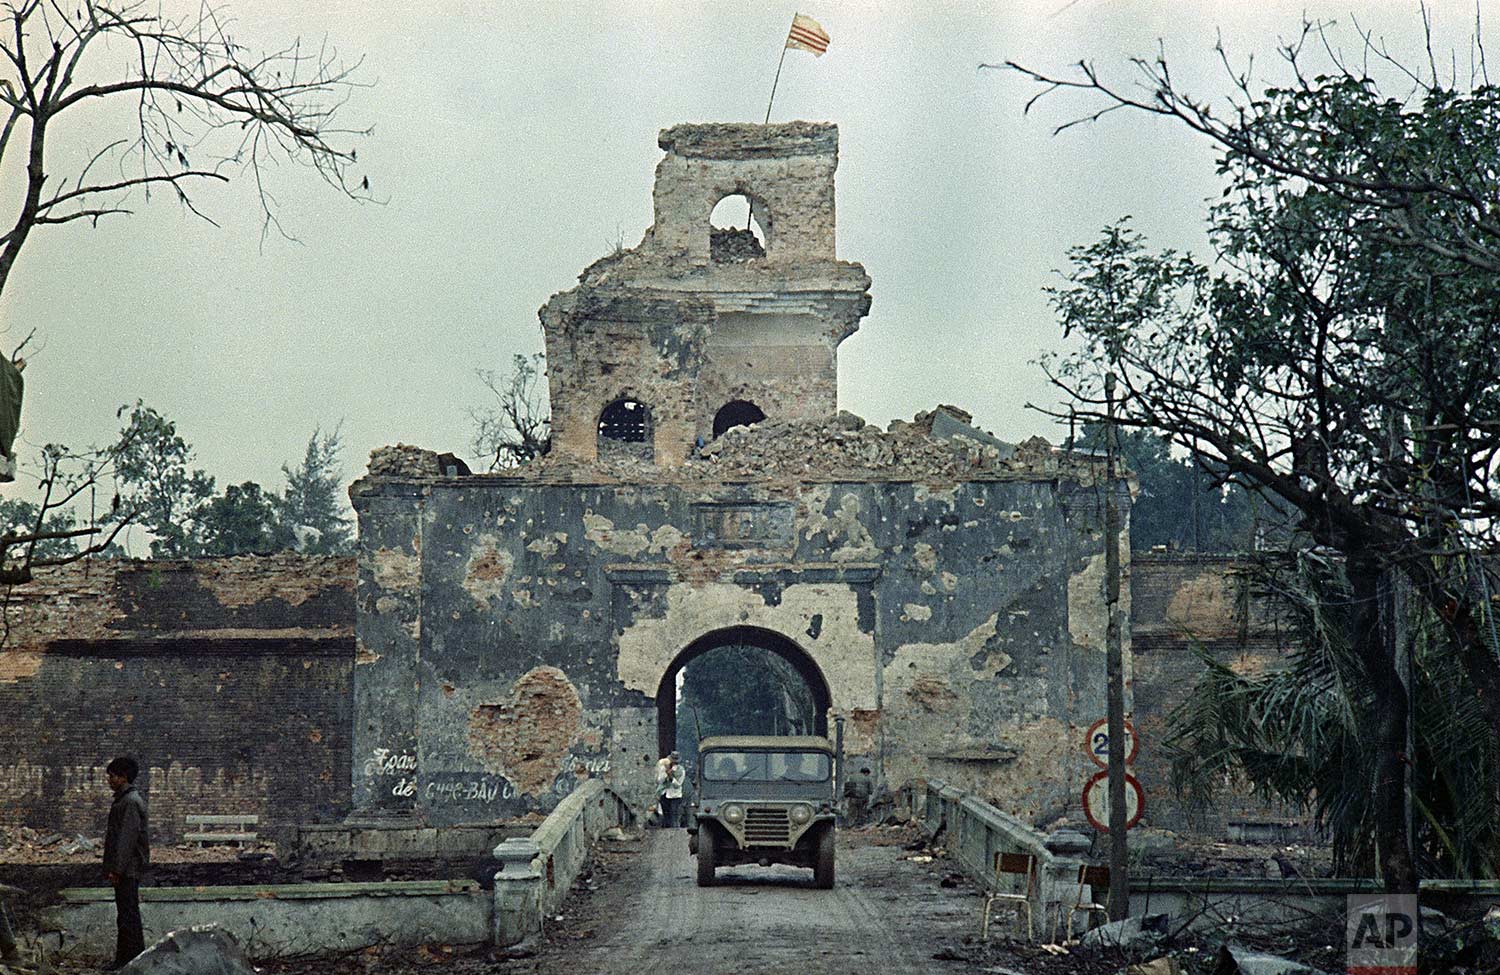  The Vietnam flag flies atop a tower of the main fortified structure in the old citadel as a jeep crosses a bridge over a moat in Hue, during the Tet Offensive, Feb. 1968.  (AP Photo) 